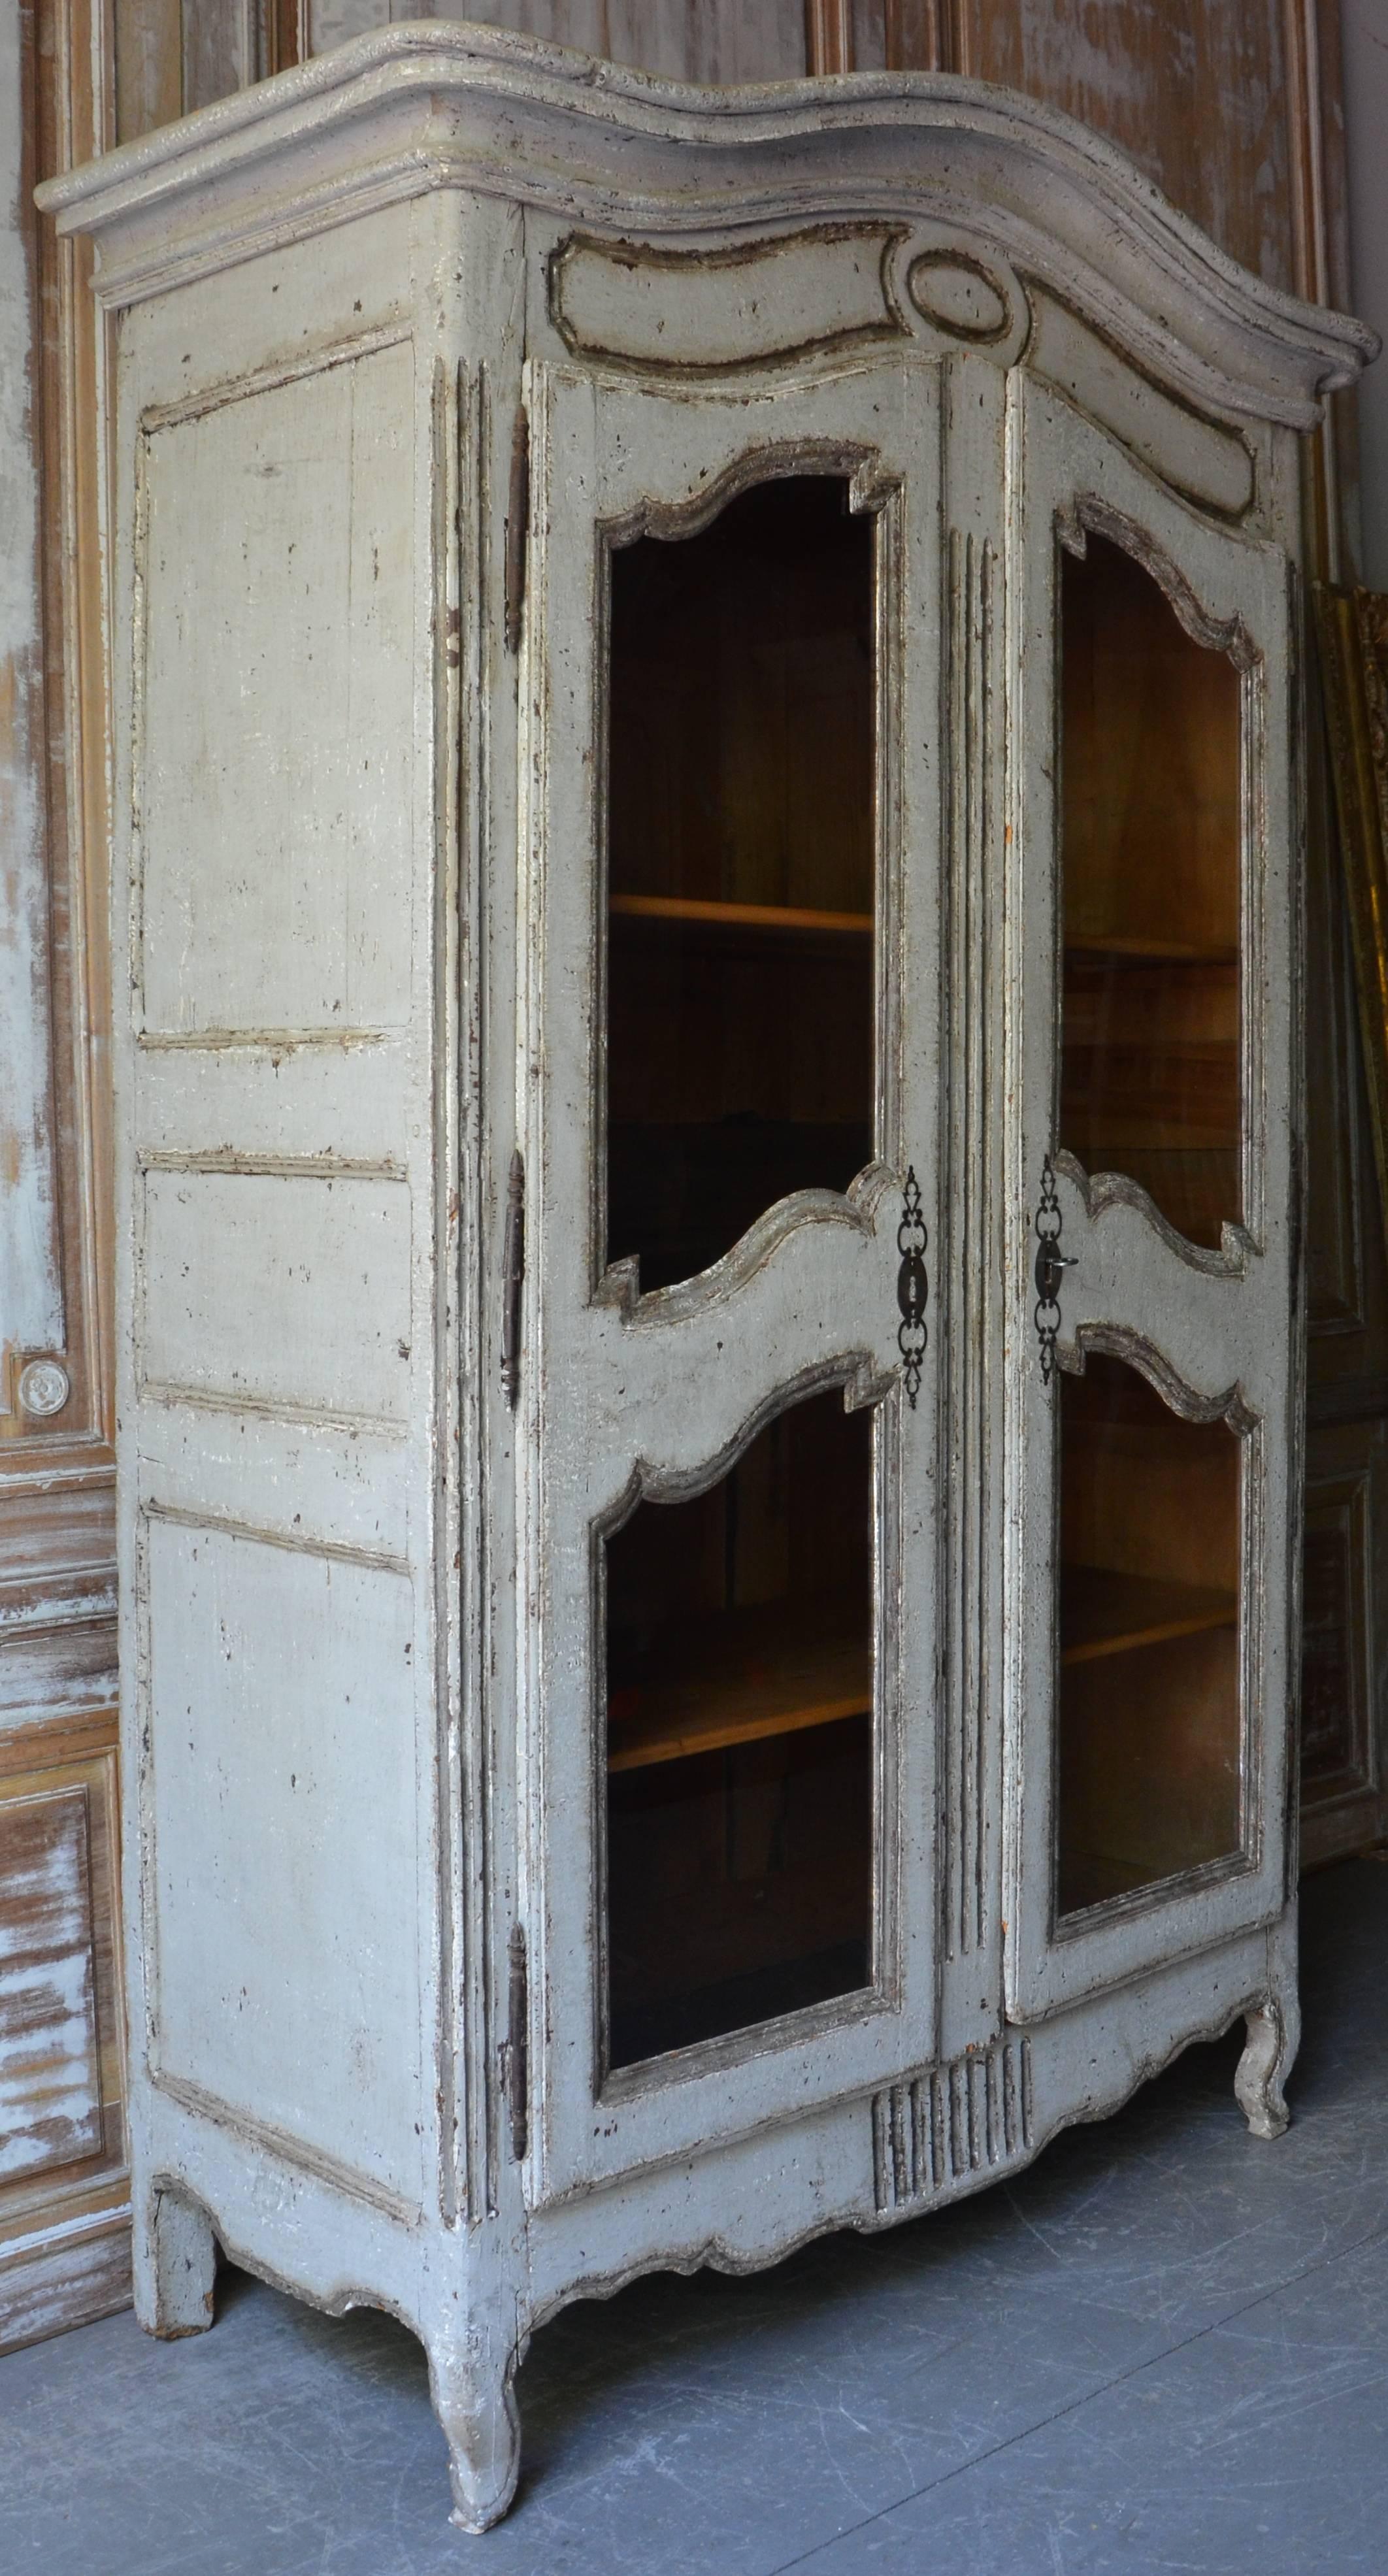 French Louis XV-style Bibliothèque in painted walnut wood with a Chapeau de Gendarme crown, double glass doors, original hardwares and three inside shelves.

Measurement without cornice:
W: 50.75